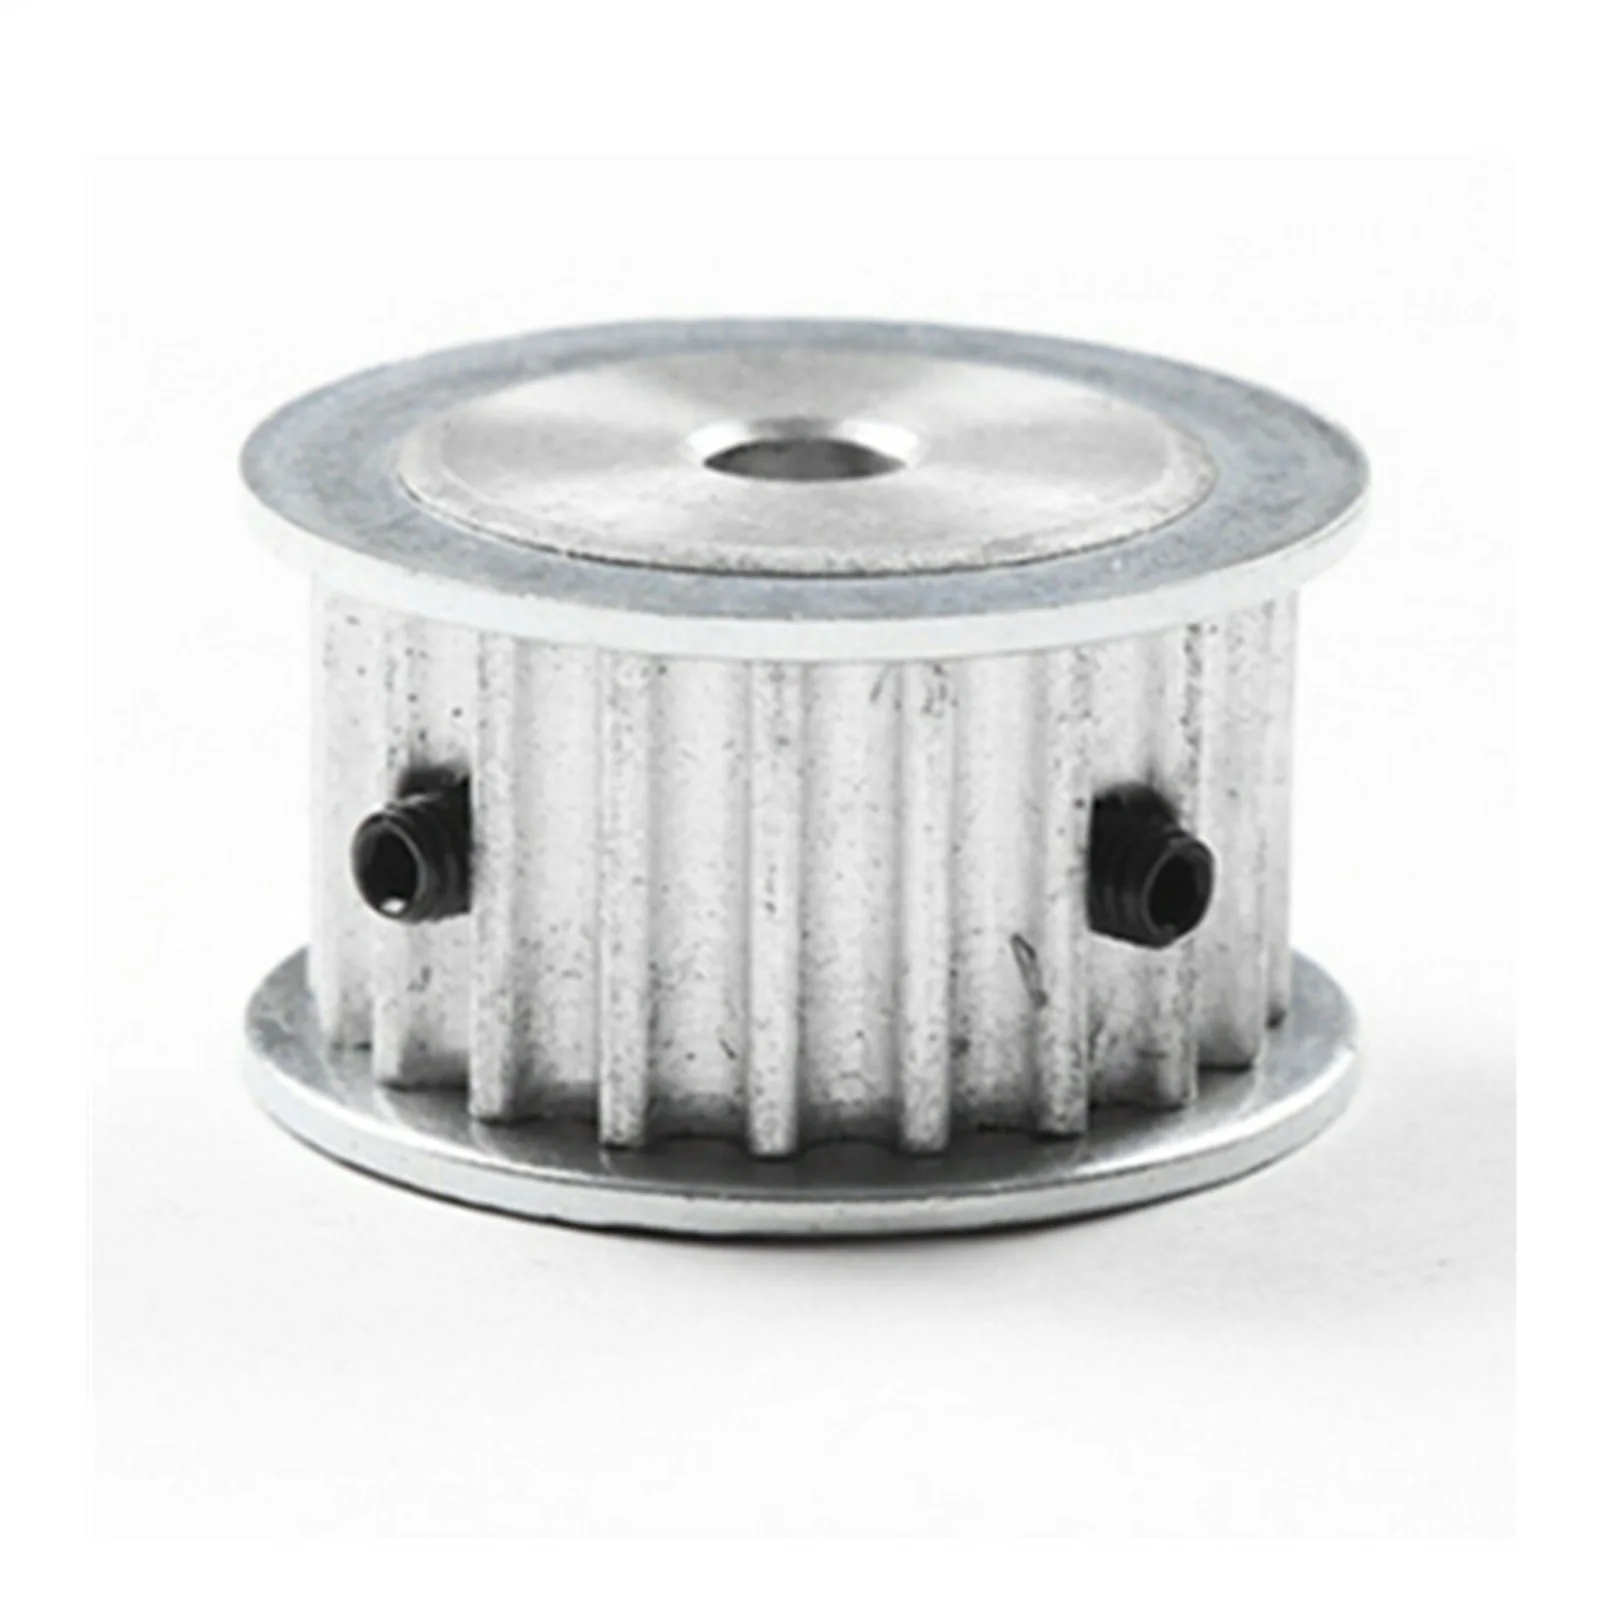 

1PC HTD3M 22T Timing Pulley 22Teeth HTD3M-22T, 16mm Width, Toothed Belt Pulley, 5/6/6.35/7/8/10mm Bore, Gear Pulley